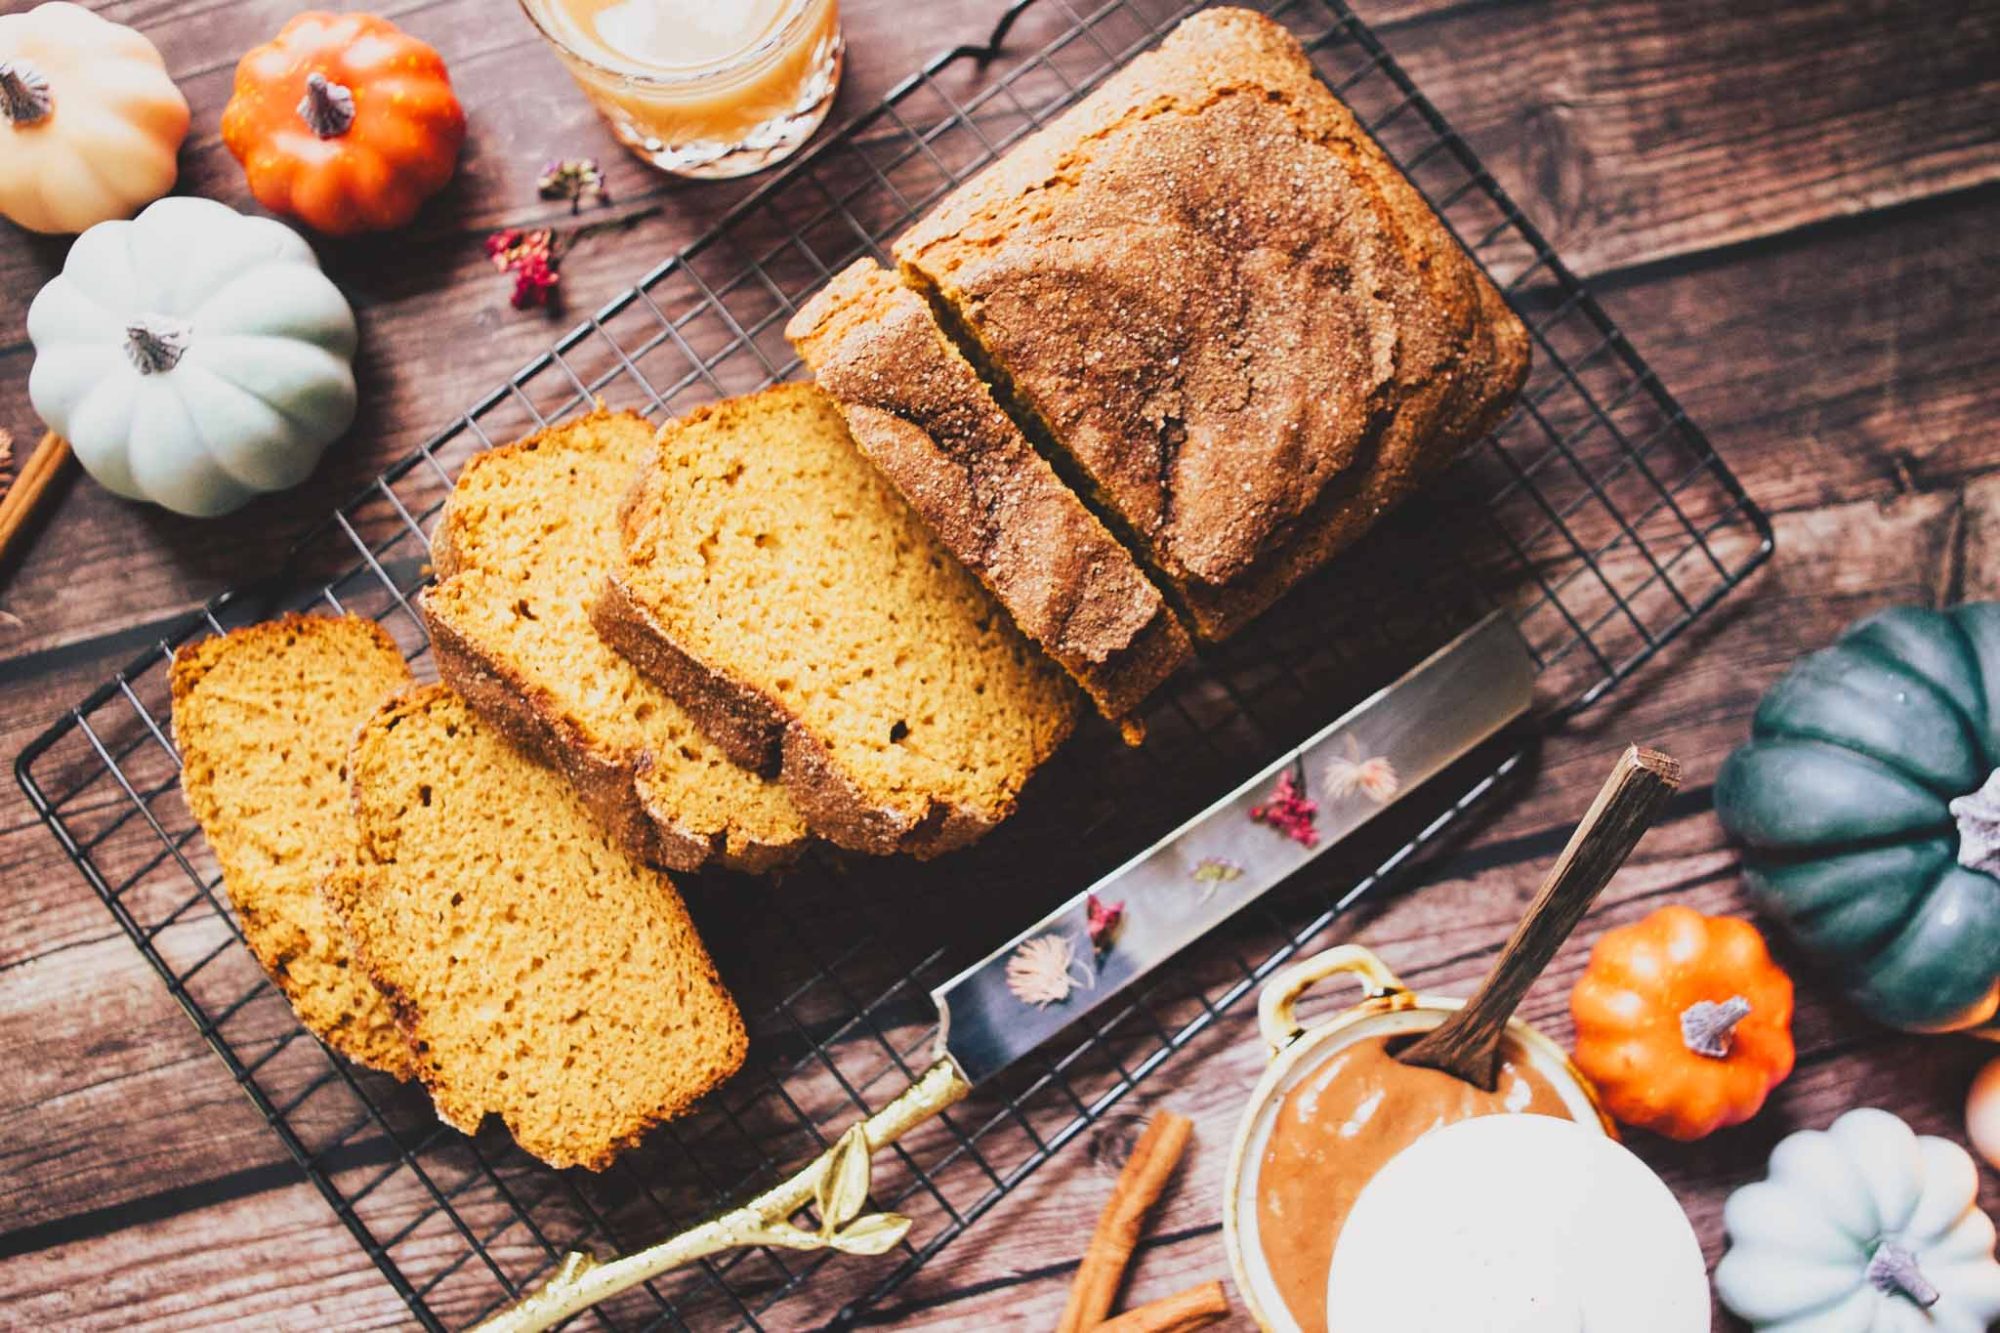 Apple Cider Pumpkin Bread with Chocolate Cream Cheese Butter